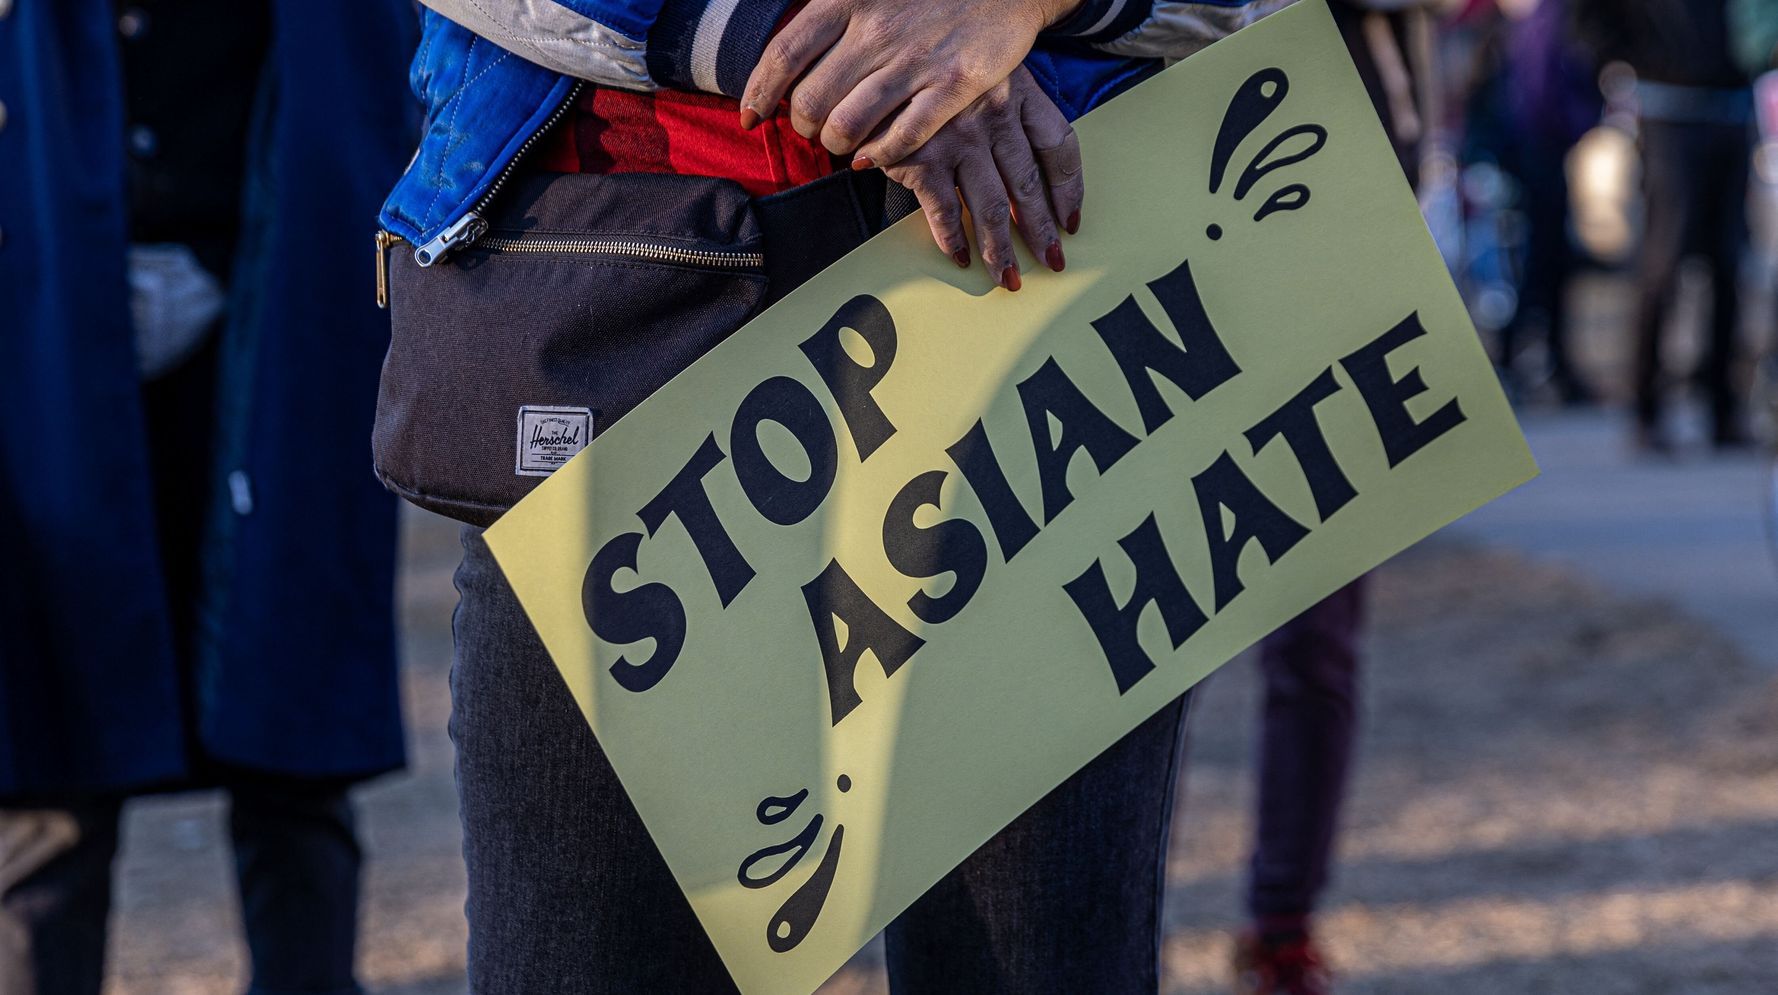 2020 Had The Most Reported Hate Crimes Since 2001: FBI Data